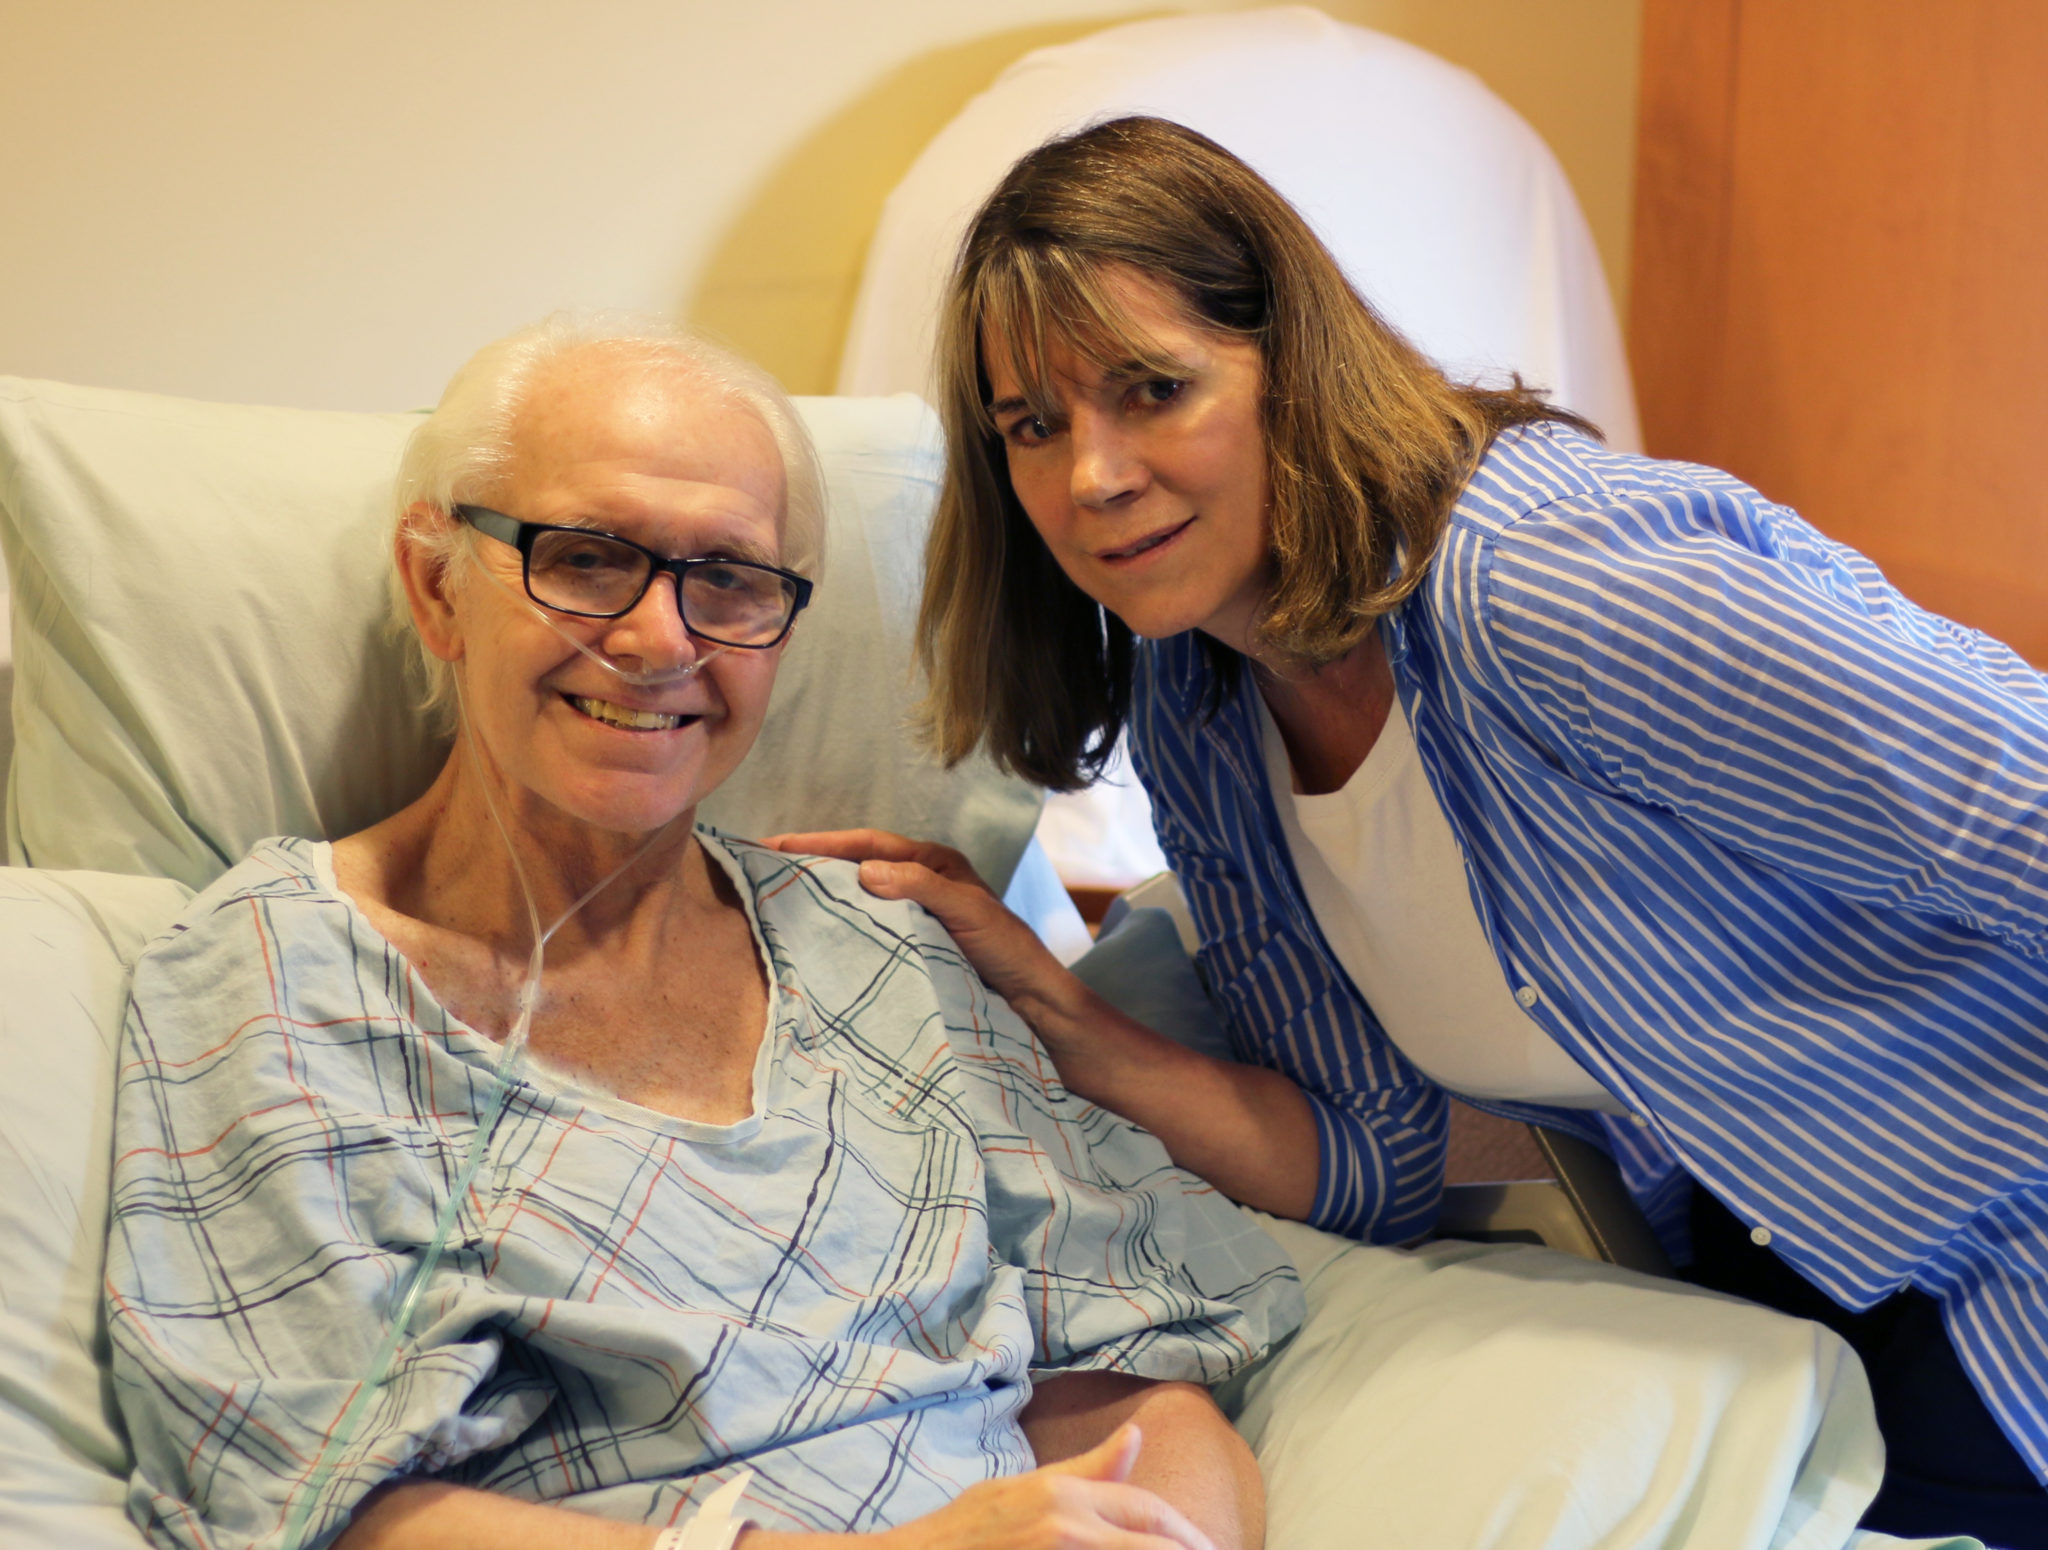 A man on hospice services wearing a hospital gown, in the inpatient unit smiles about his hospice experience, next to his supportive wife who leans close to him.